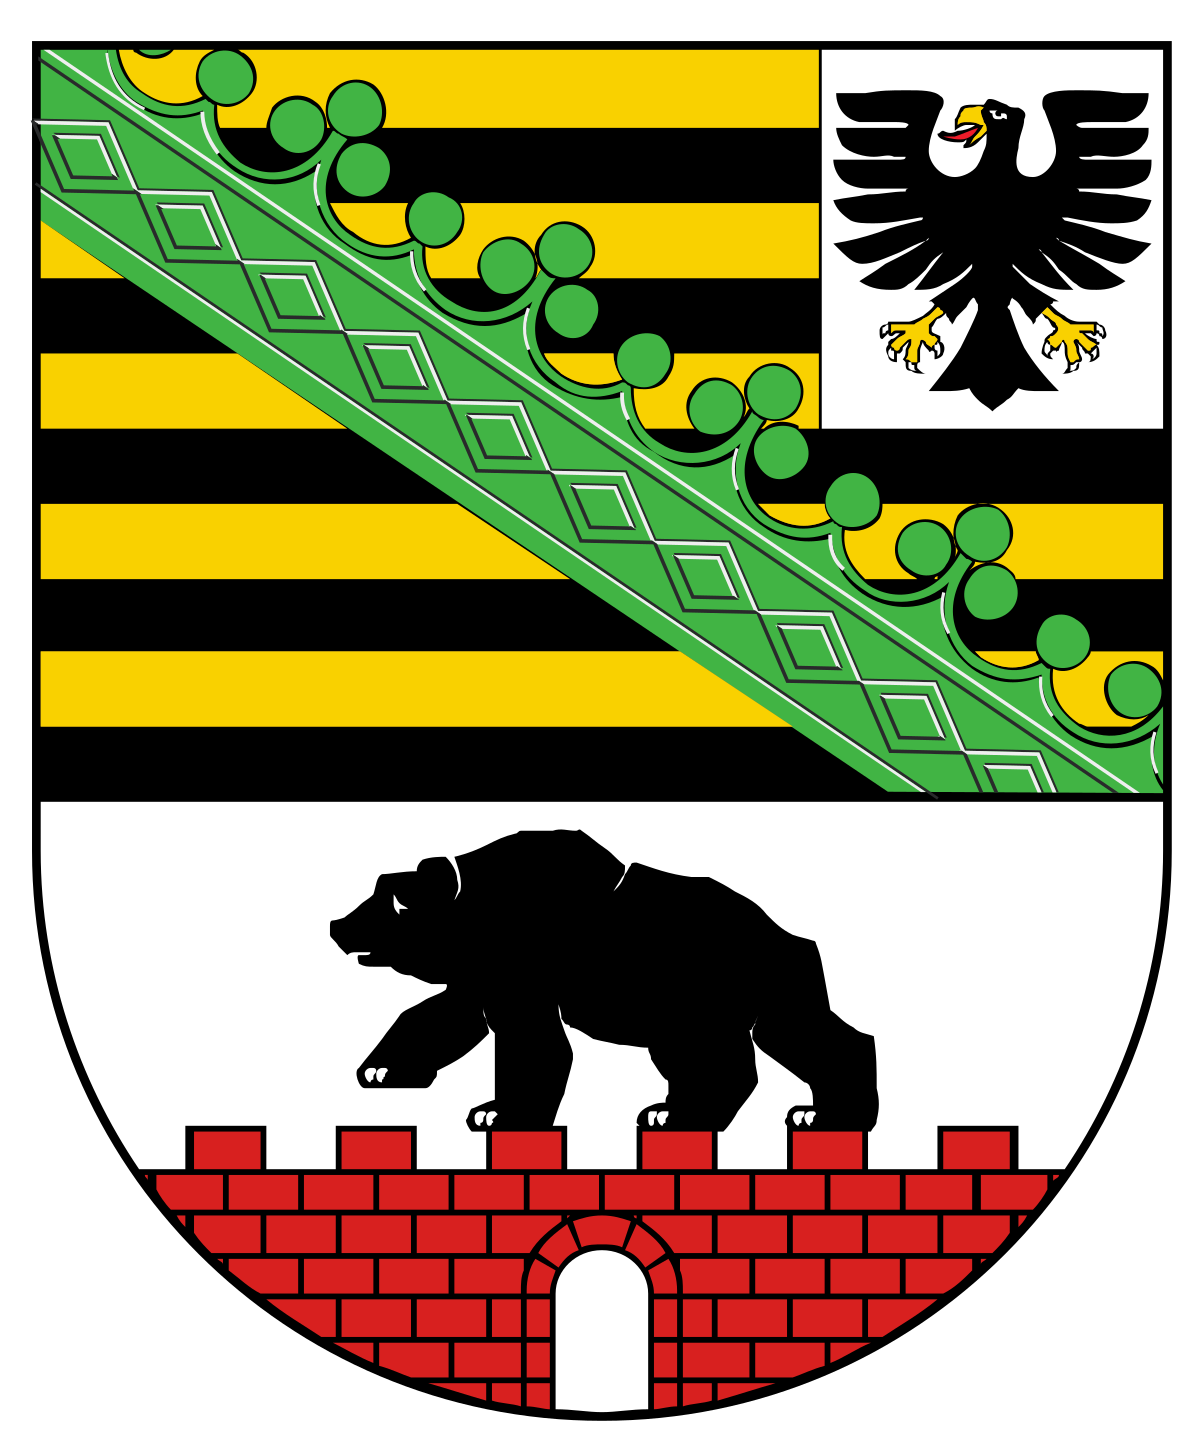 2023-02/state_of_saxony-anhalt.png